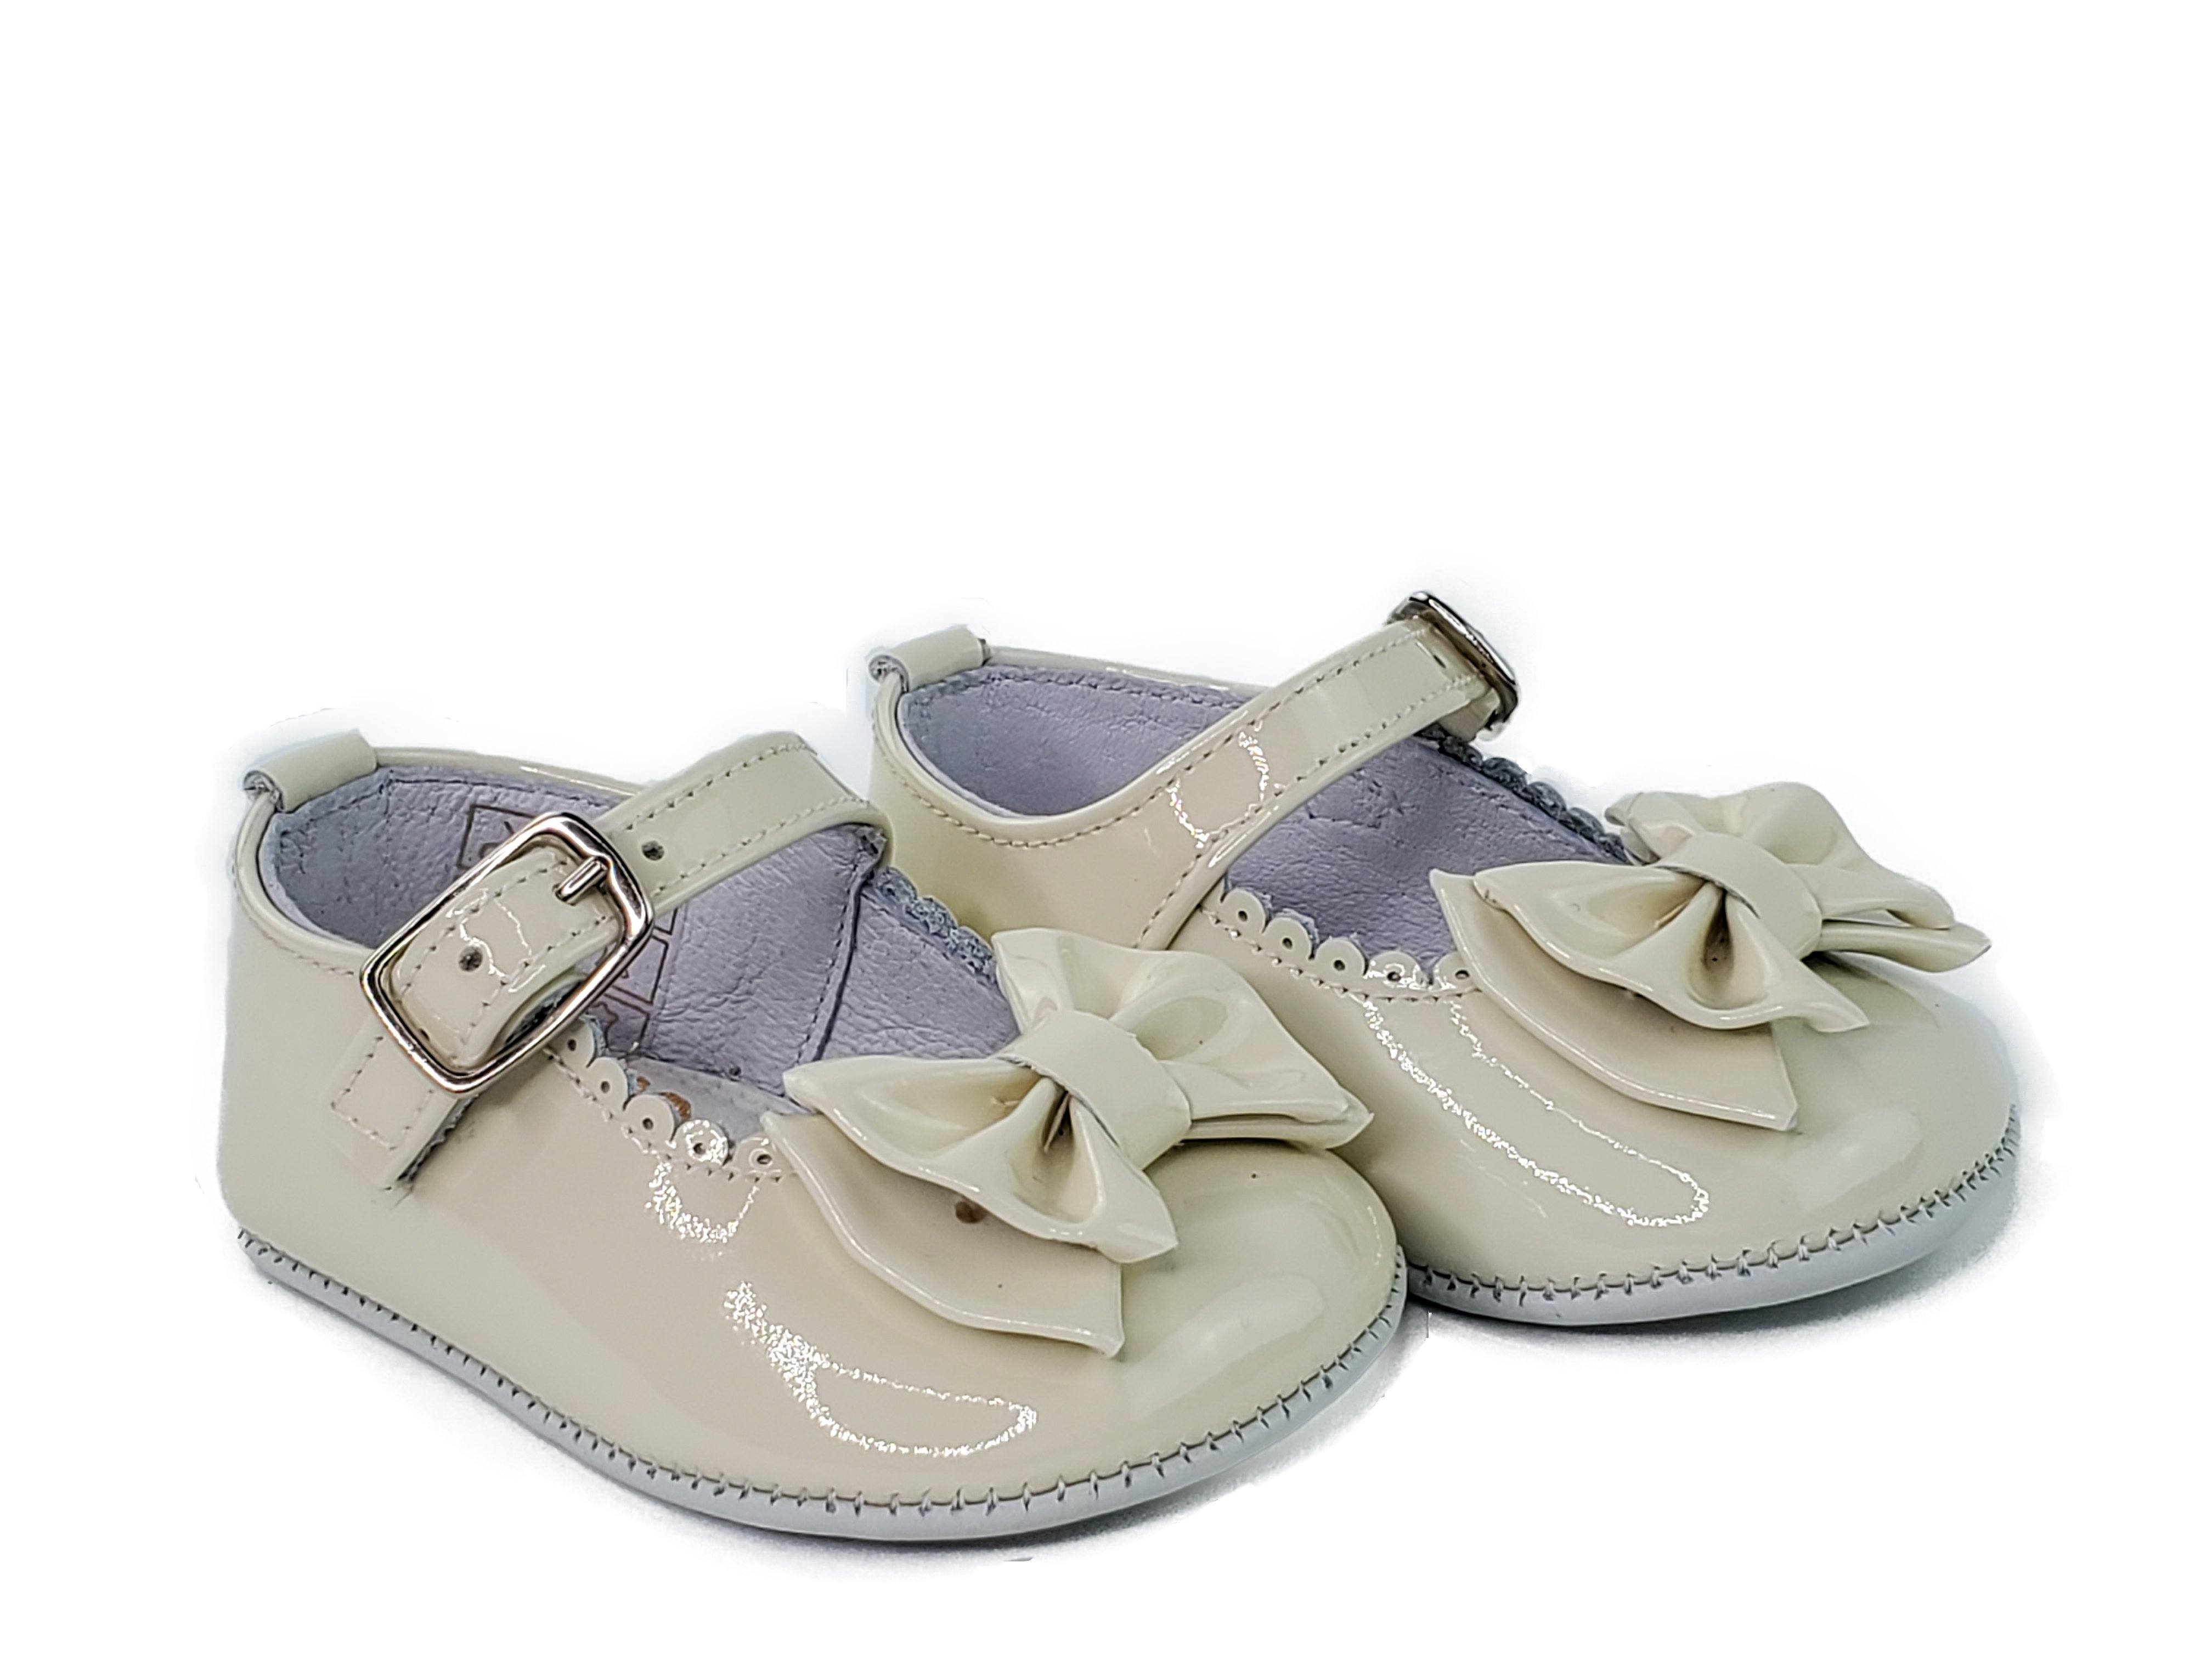 Baby Girl Beige Scalloped Mary Jane Pre-Walkers Shoes-Girl's Shoes-Girl's Shoes Store Girls Shoes Alfa Baby Boutique 16 Beige Female